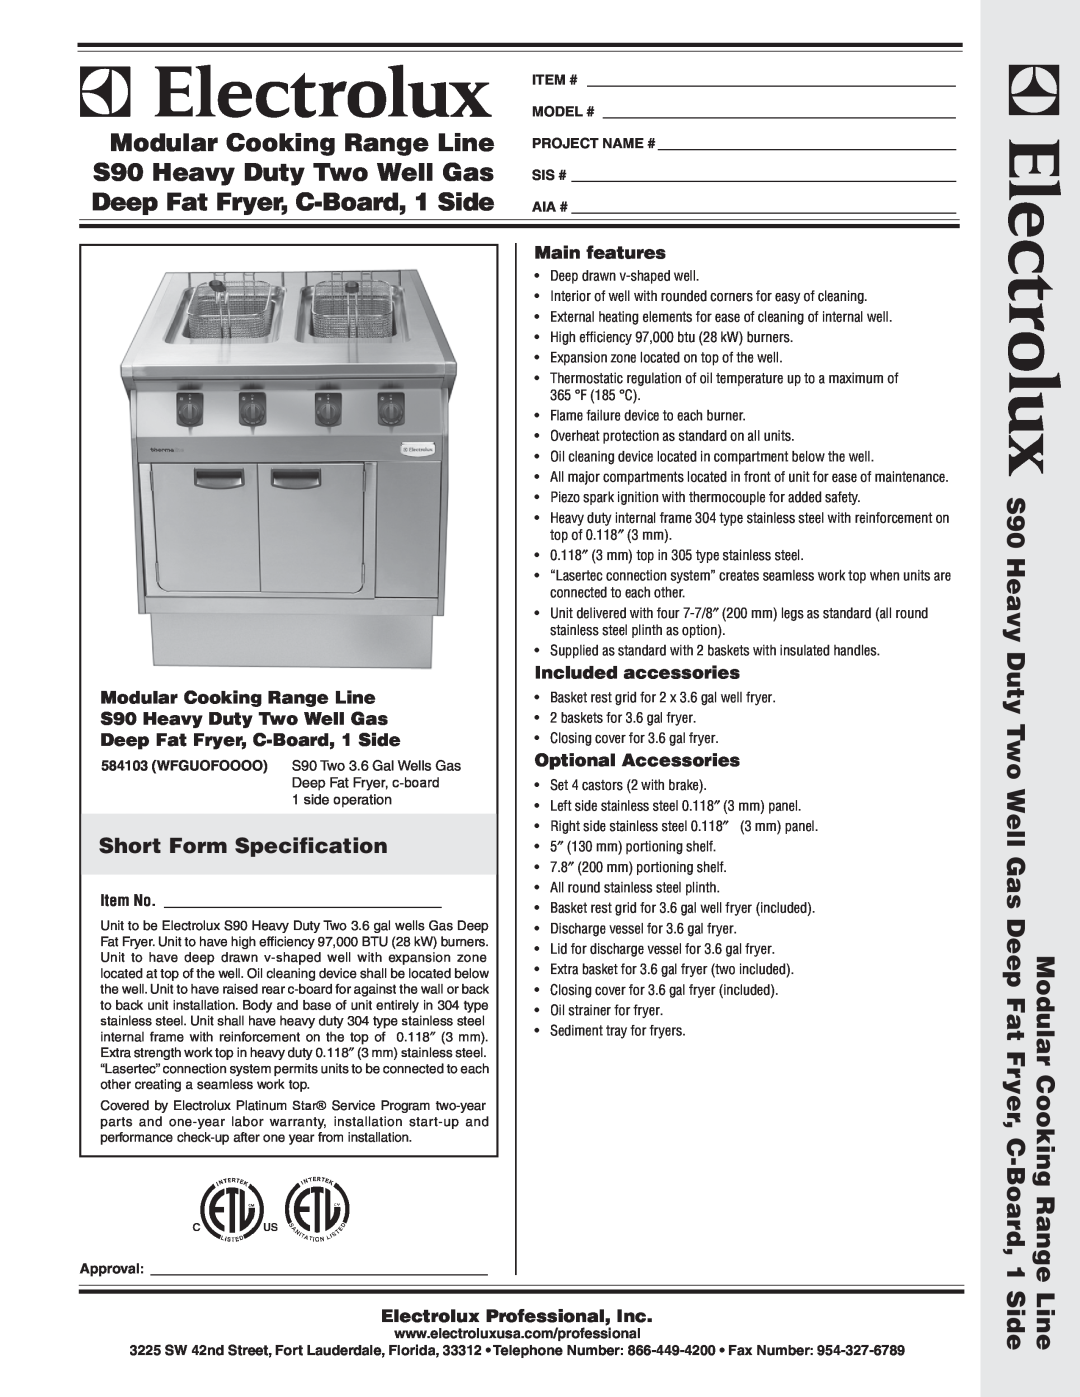 Electrolux 584103 warranty Short Form Specification, Main features, Included accessories, Optional Accessories, Item # 